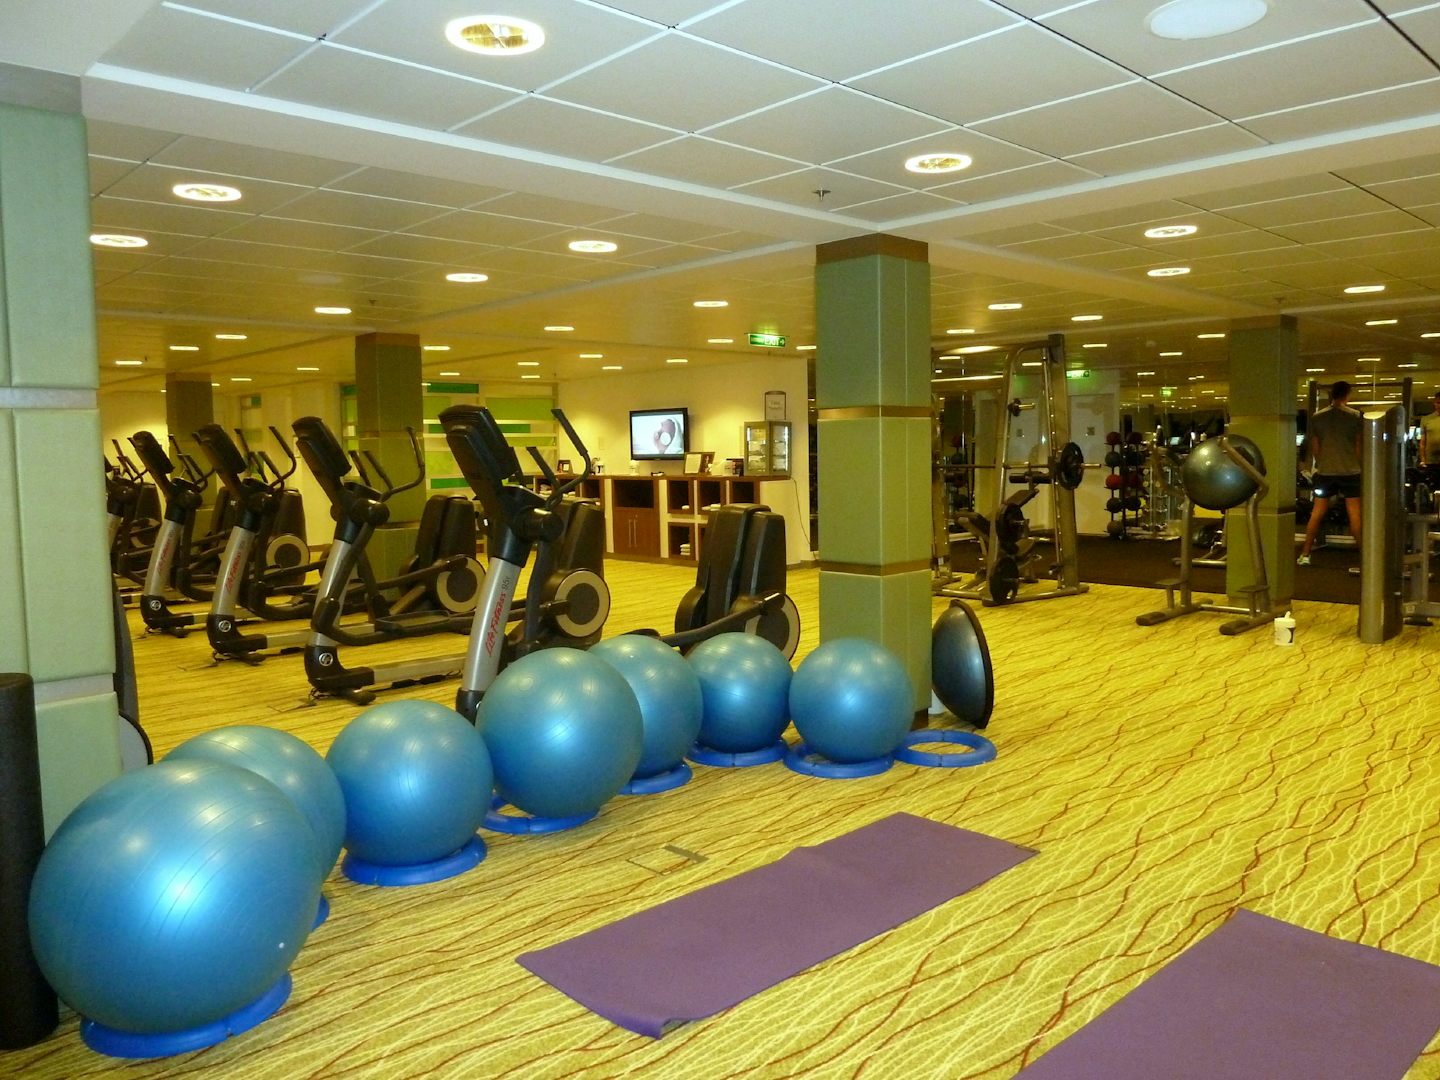 Part of the Fitness center